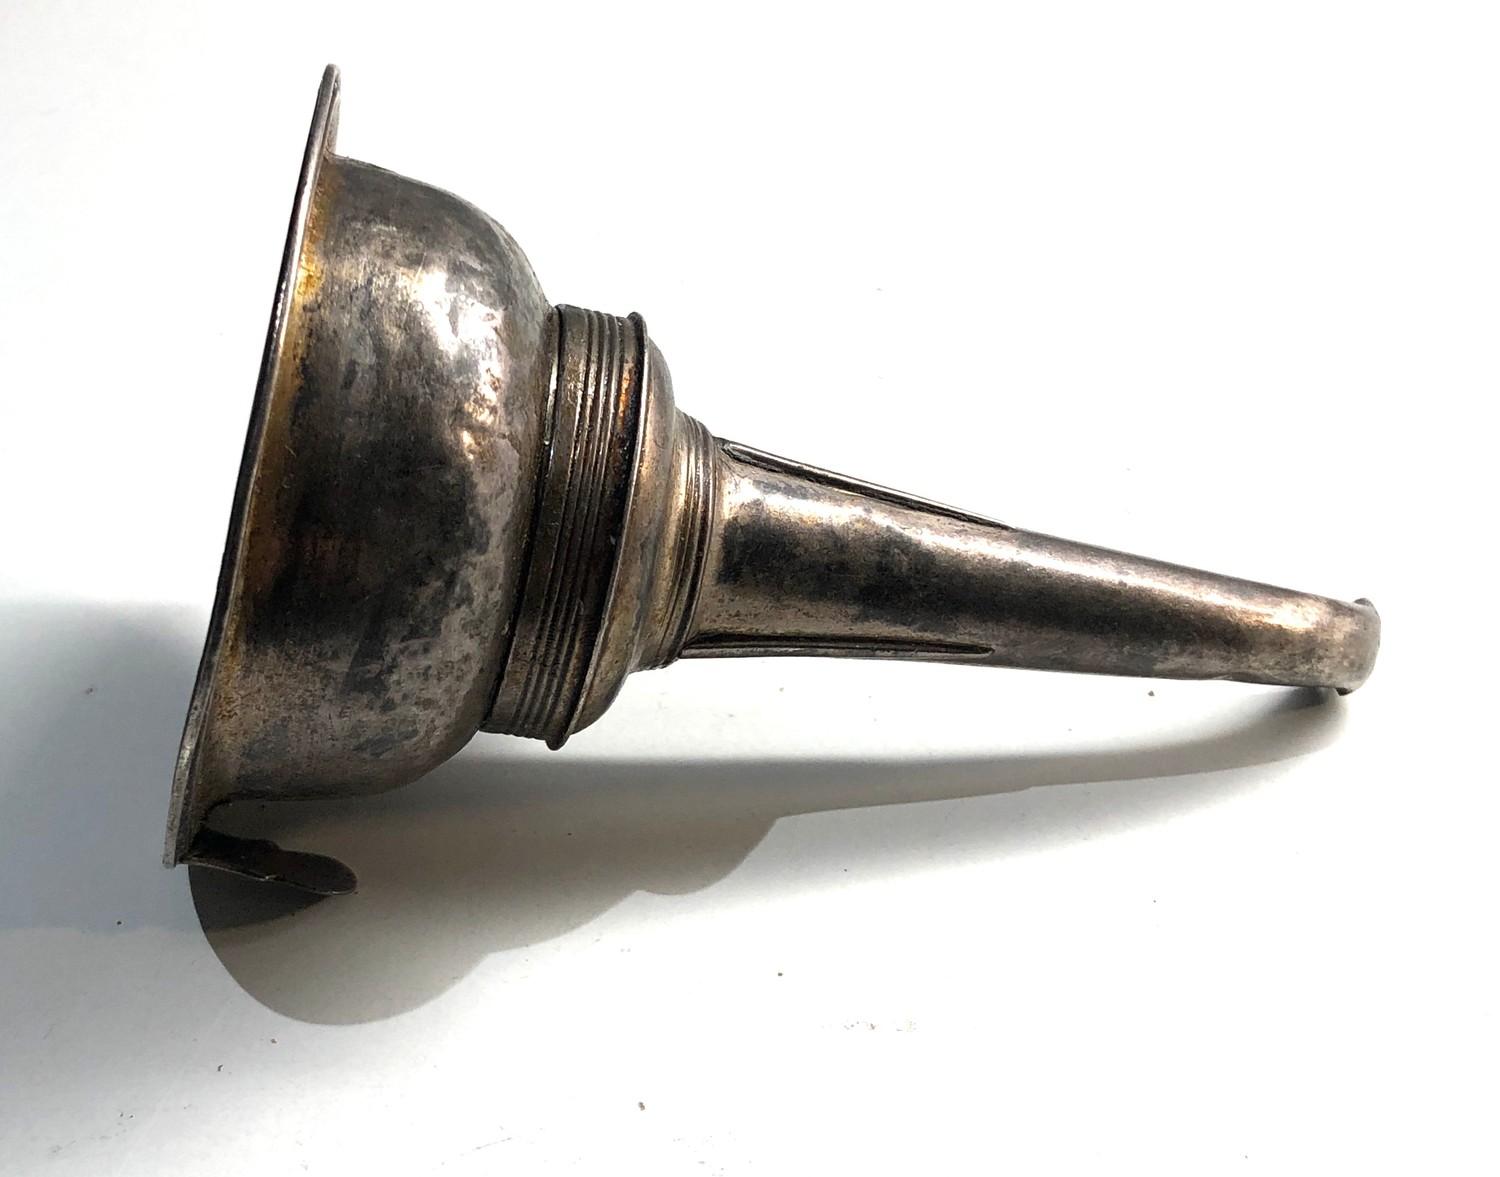 Georgian silver wine funnel London silver hallmarks age related wear marks and dents